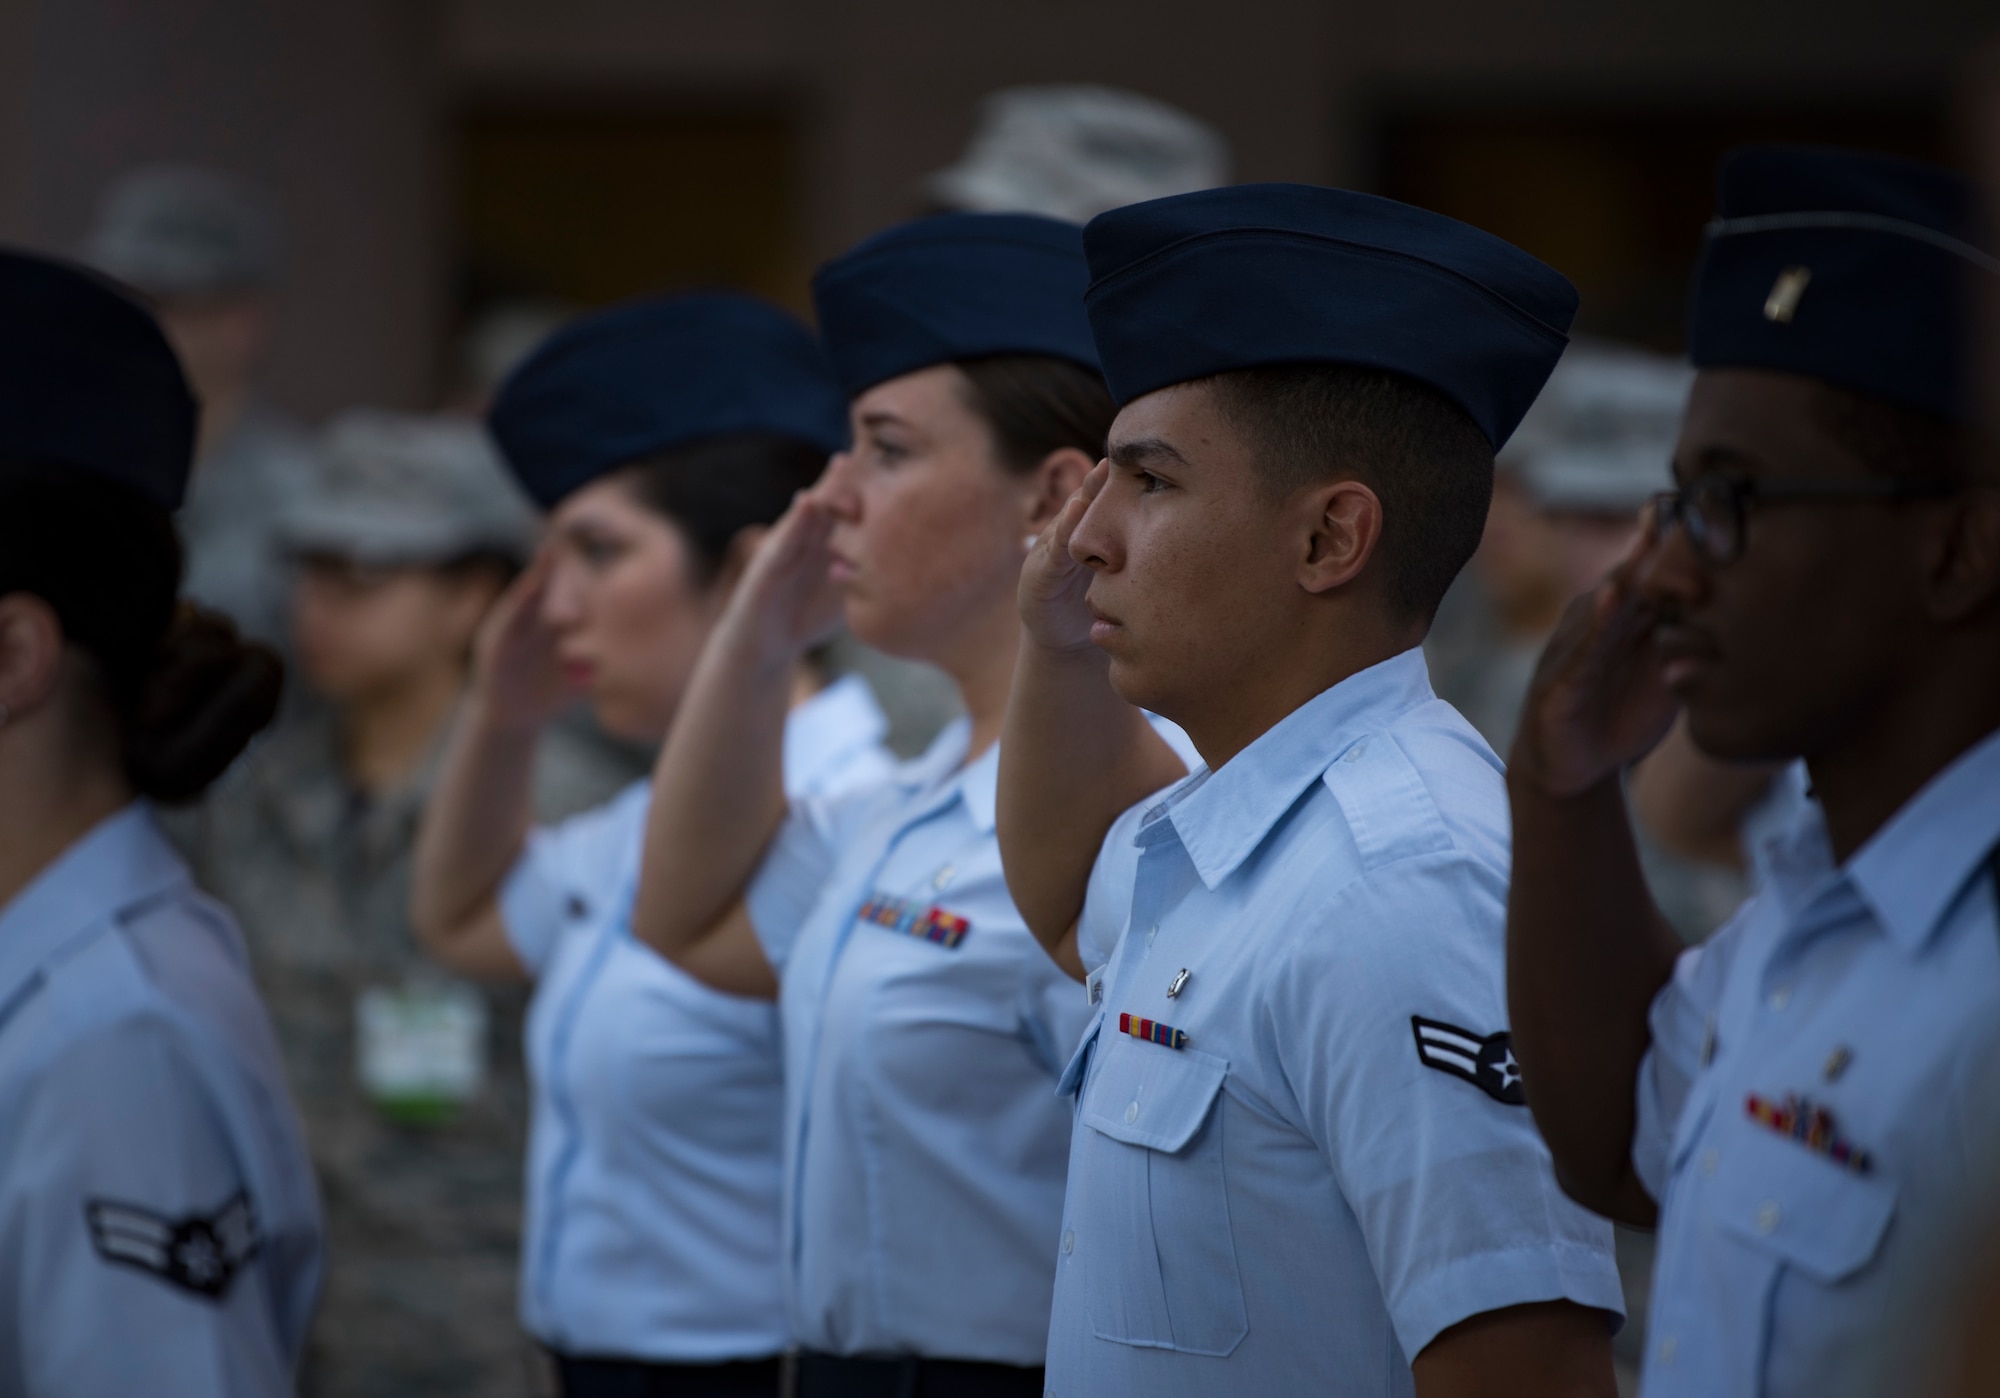 Airmen assigned to the 99th Medical Group render a salute during the playing of the National Anthem at Nellis Air Force Base, Nevada, June 29, 2018. The Airmen were part of the initial flight of Airmen during a change of command ceremony for the 99th MDG. (U.S. Air Force photo by Airman 1st Class Andrew D. Sarver)